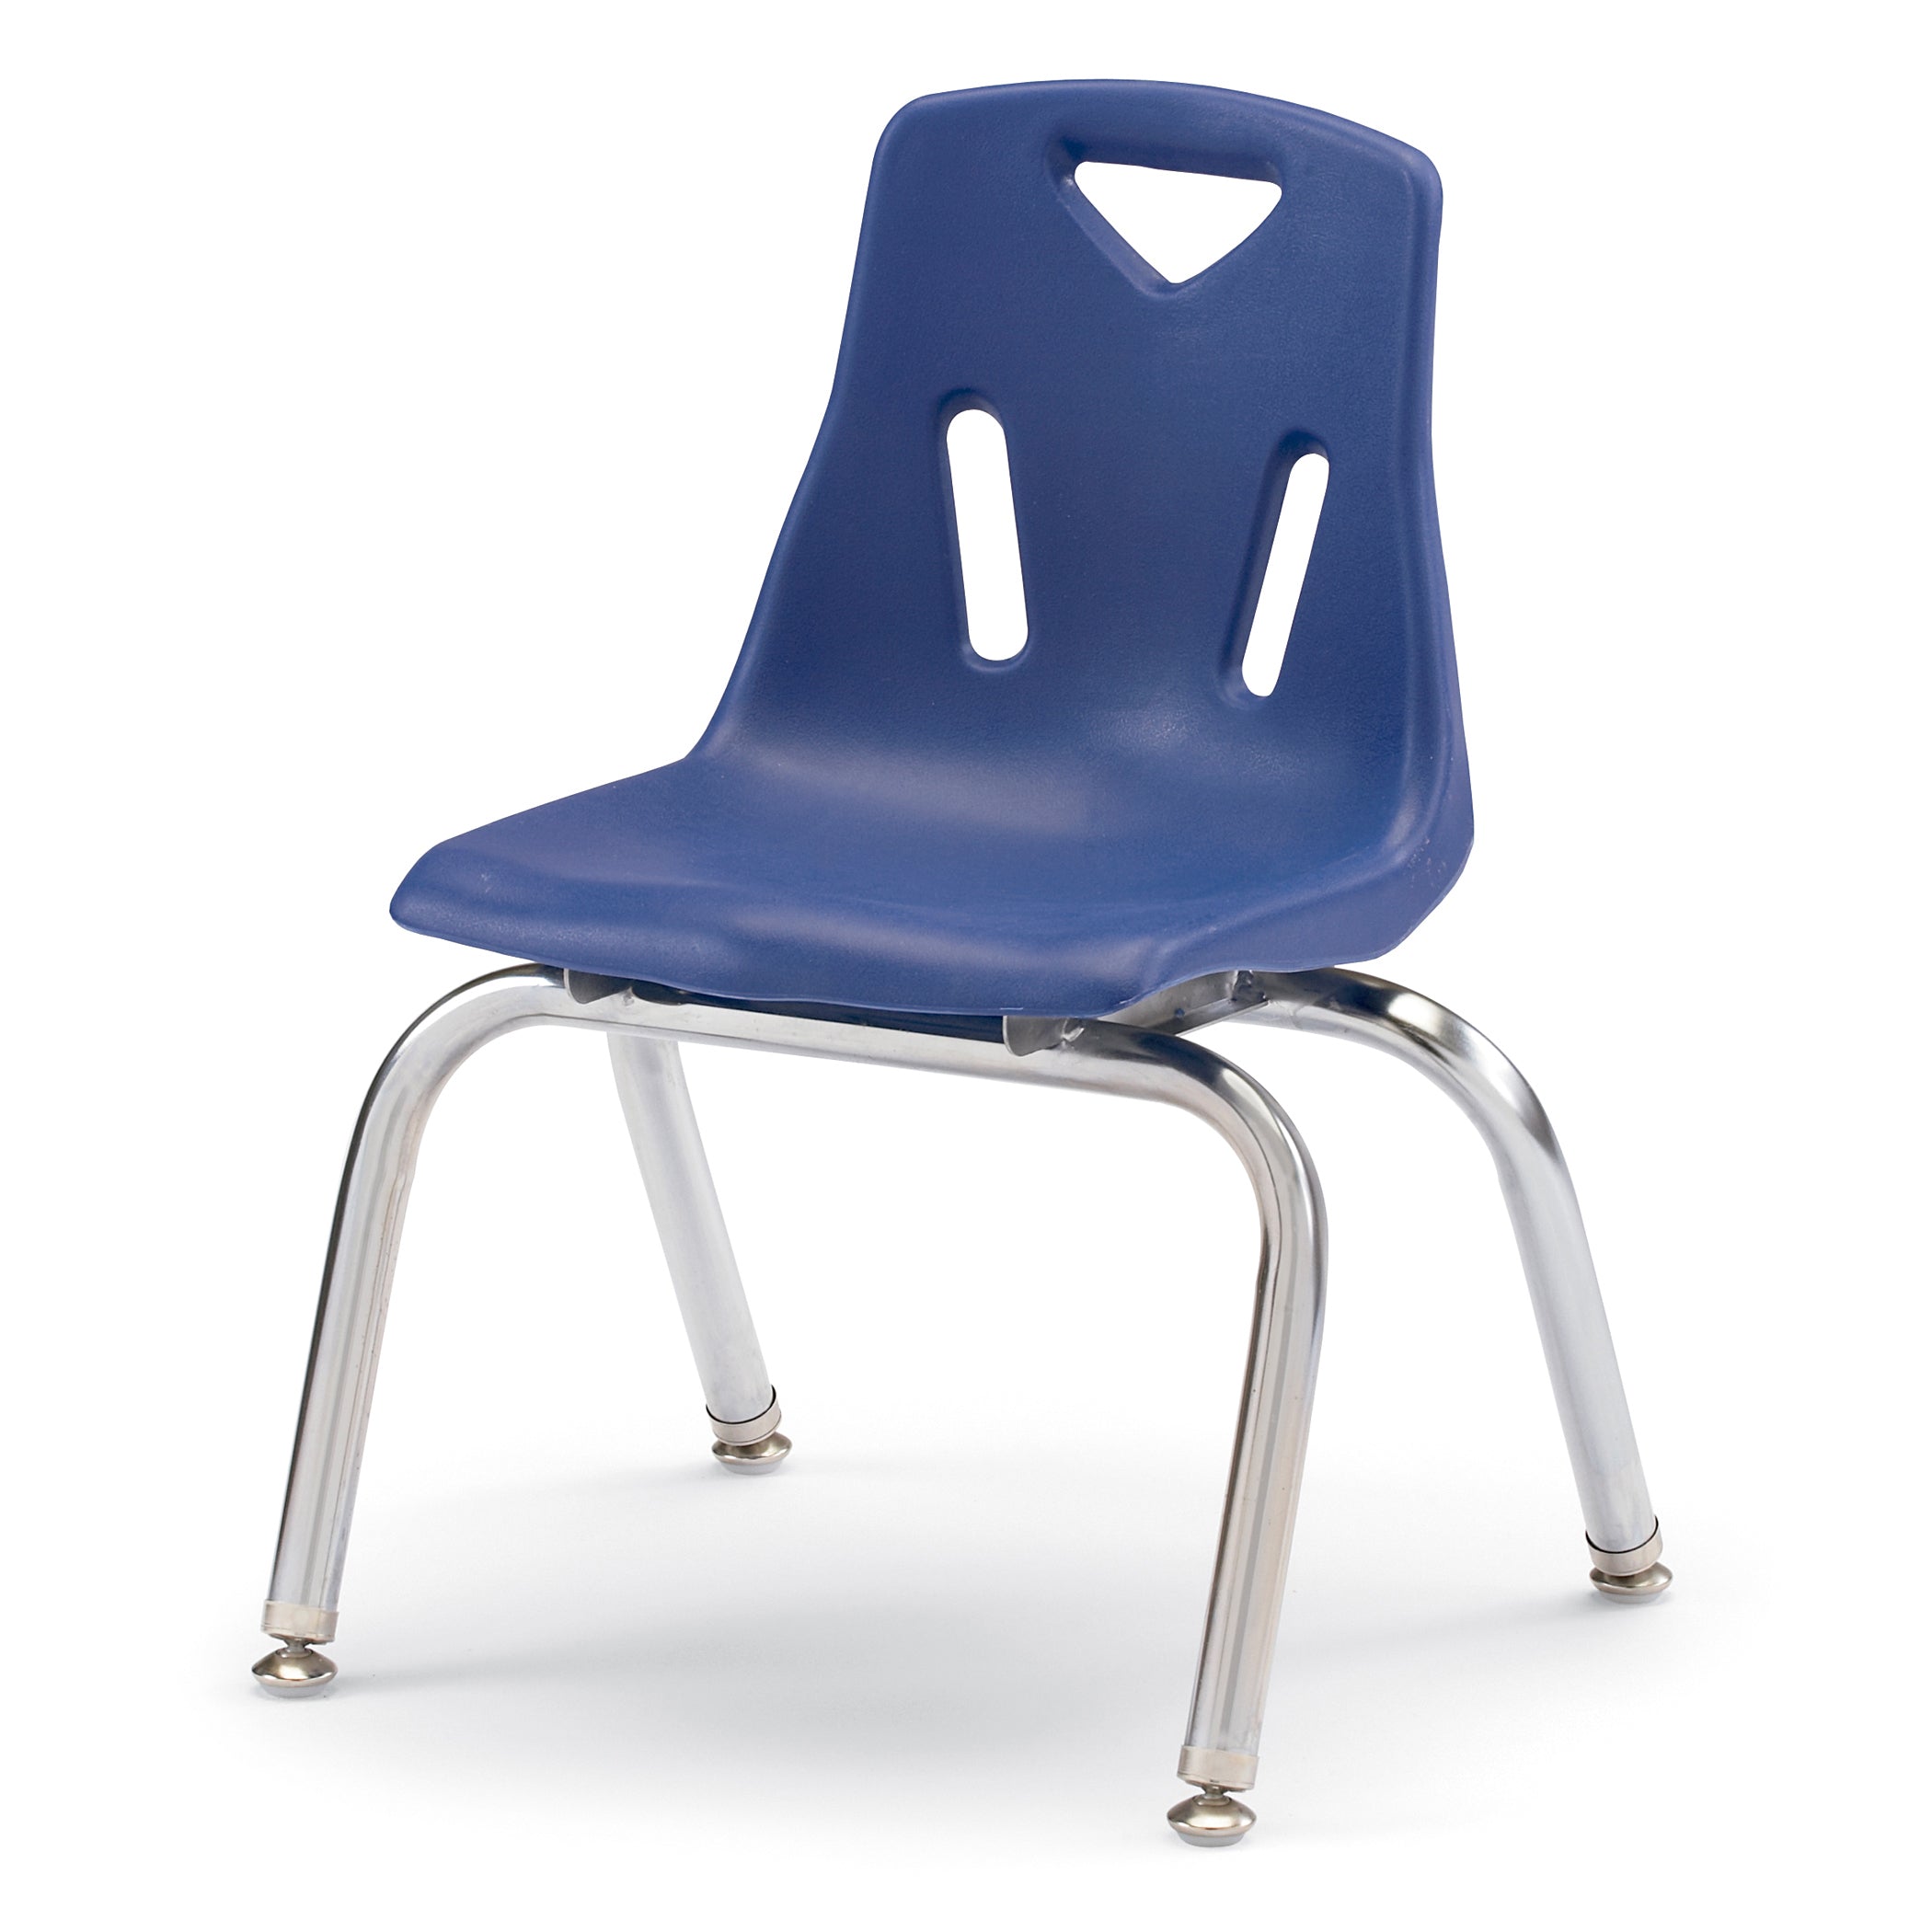 8142JC1003, Berries Stacking Chair with Chrome-Plated Legs - 12" Ht - Blue